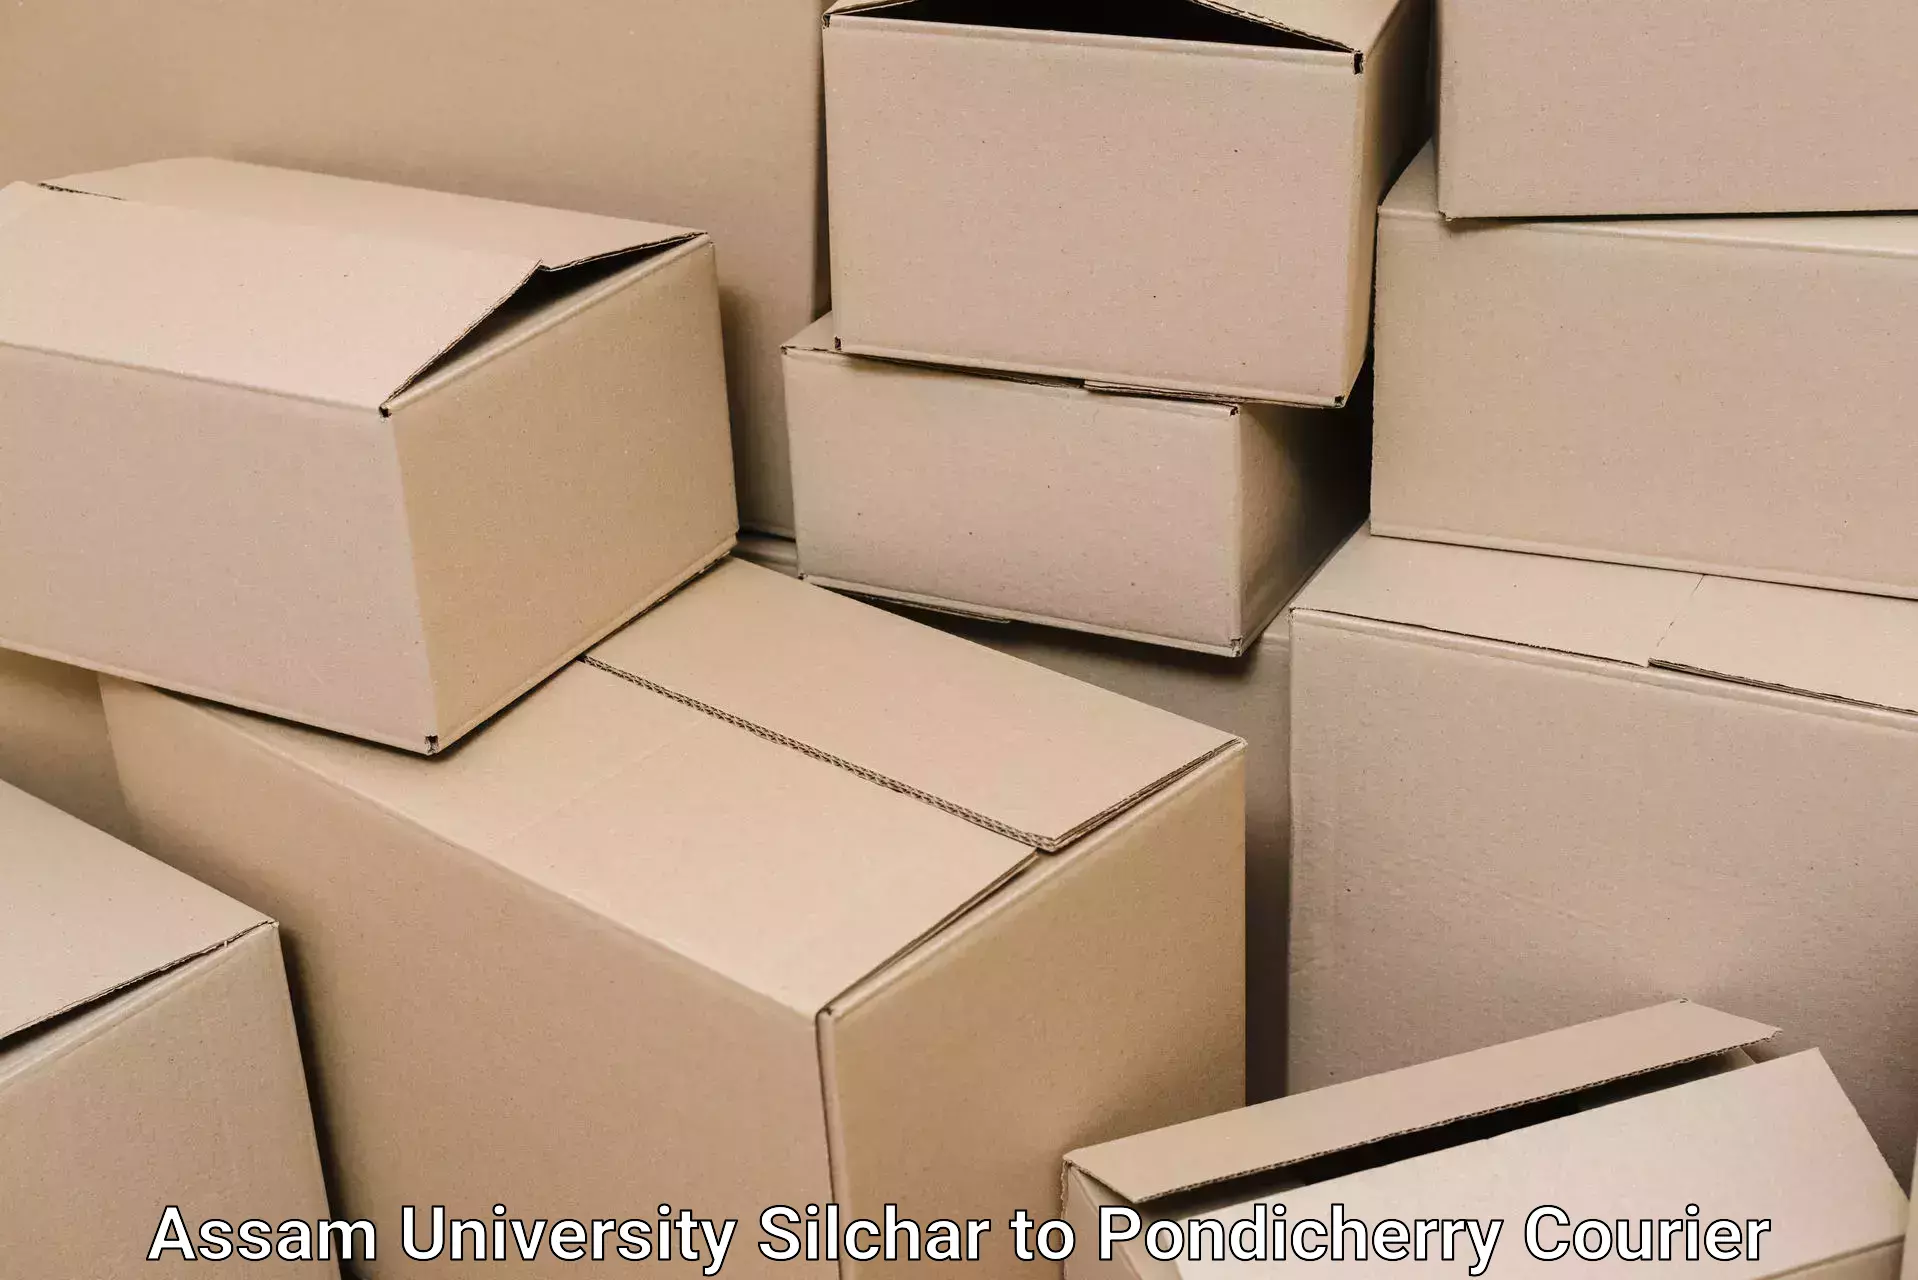 Efficient relocation services Assam University Silchar to Metttupalayam